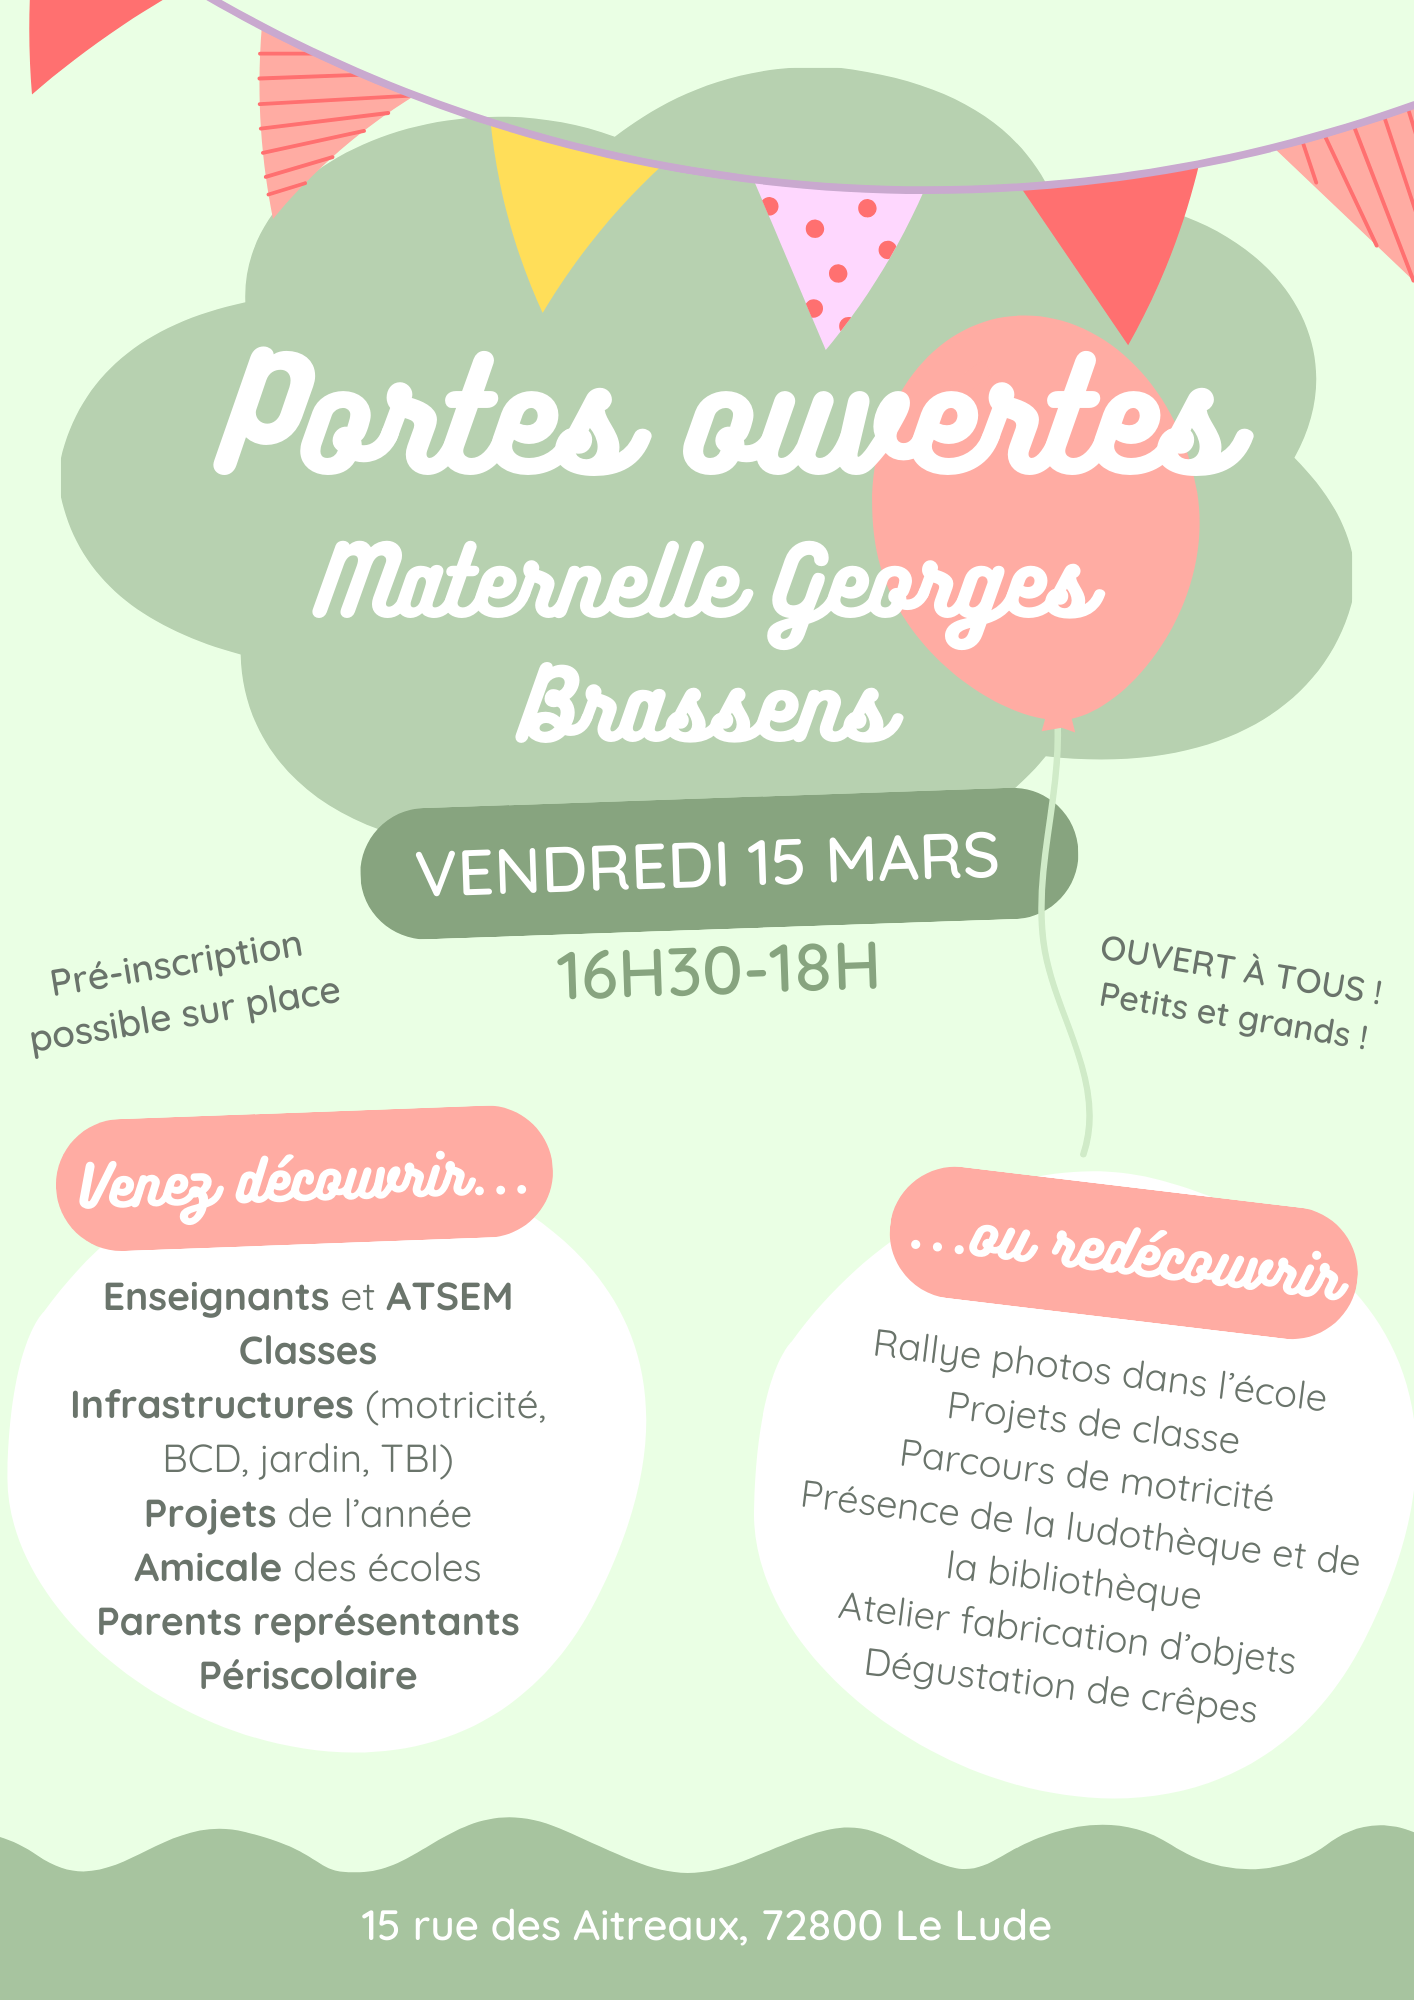 You are currently viewing Ecole Maternelle – Georges Brassens : Portes ouvertes